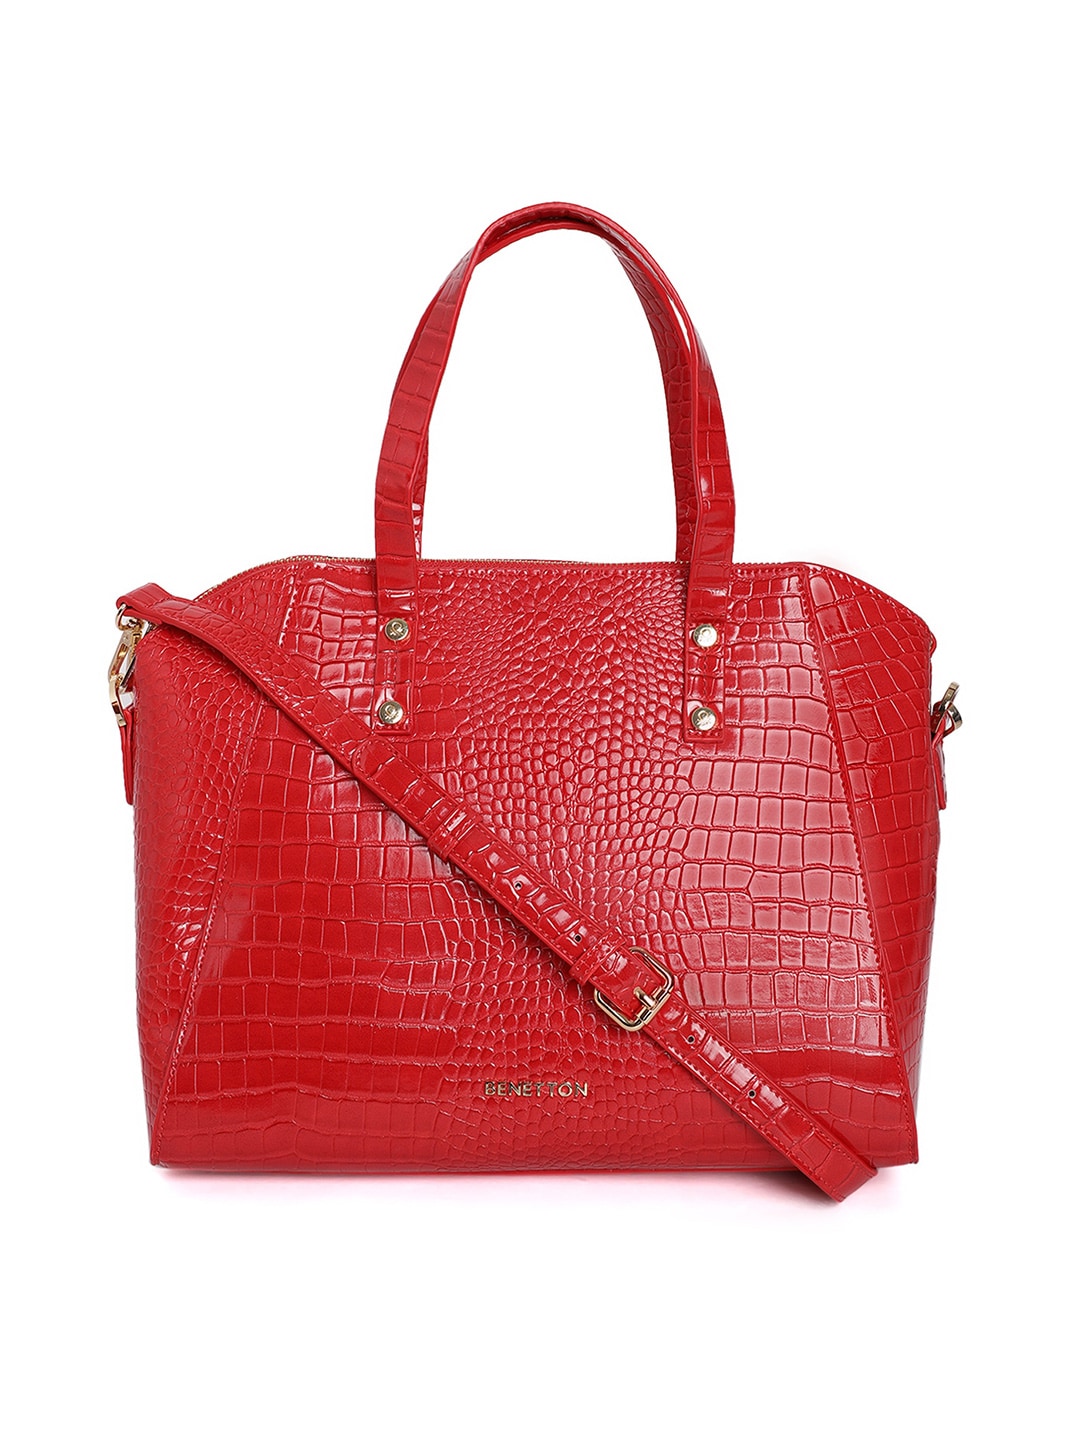 United Colors of Benetton Red Animal Textured Handheld Bag Price in India